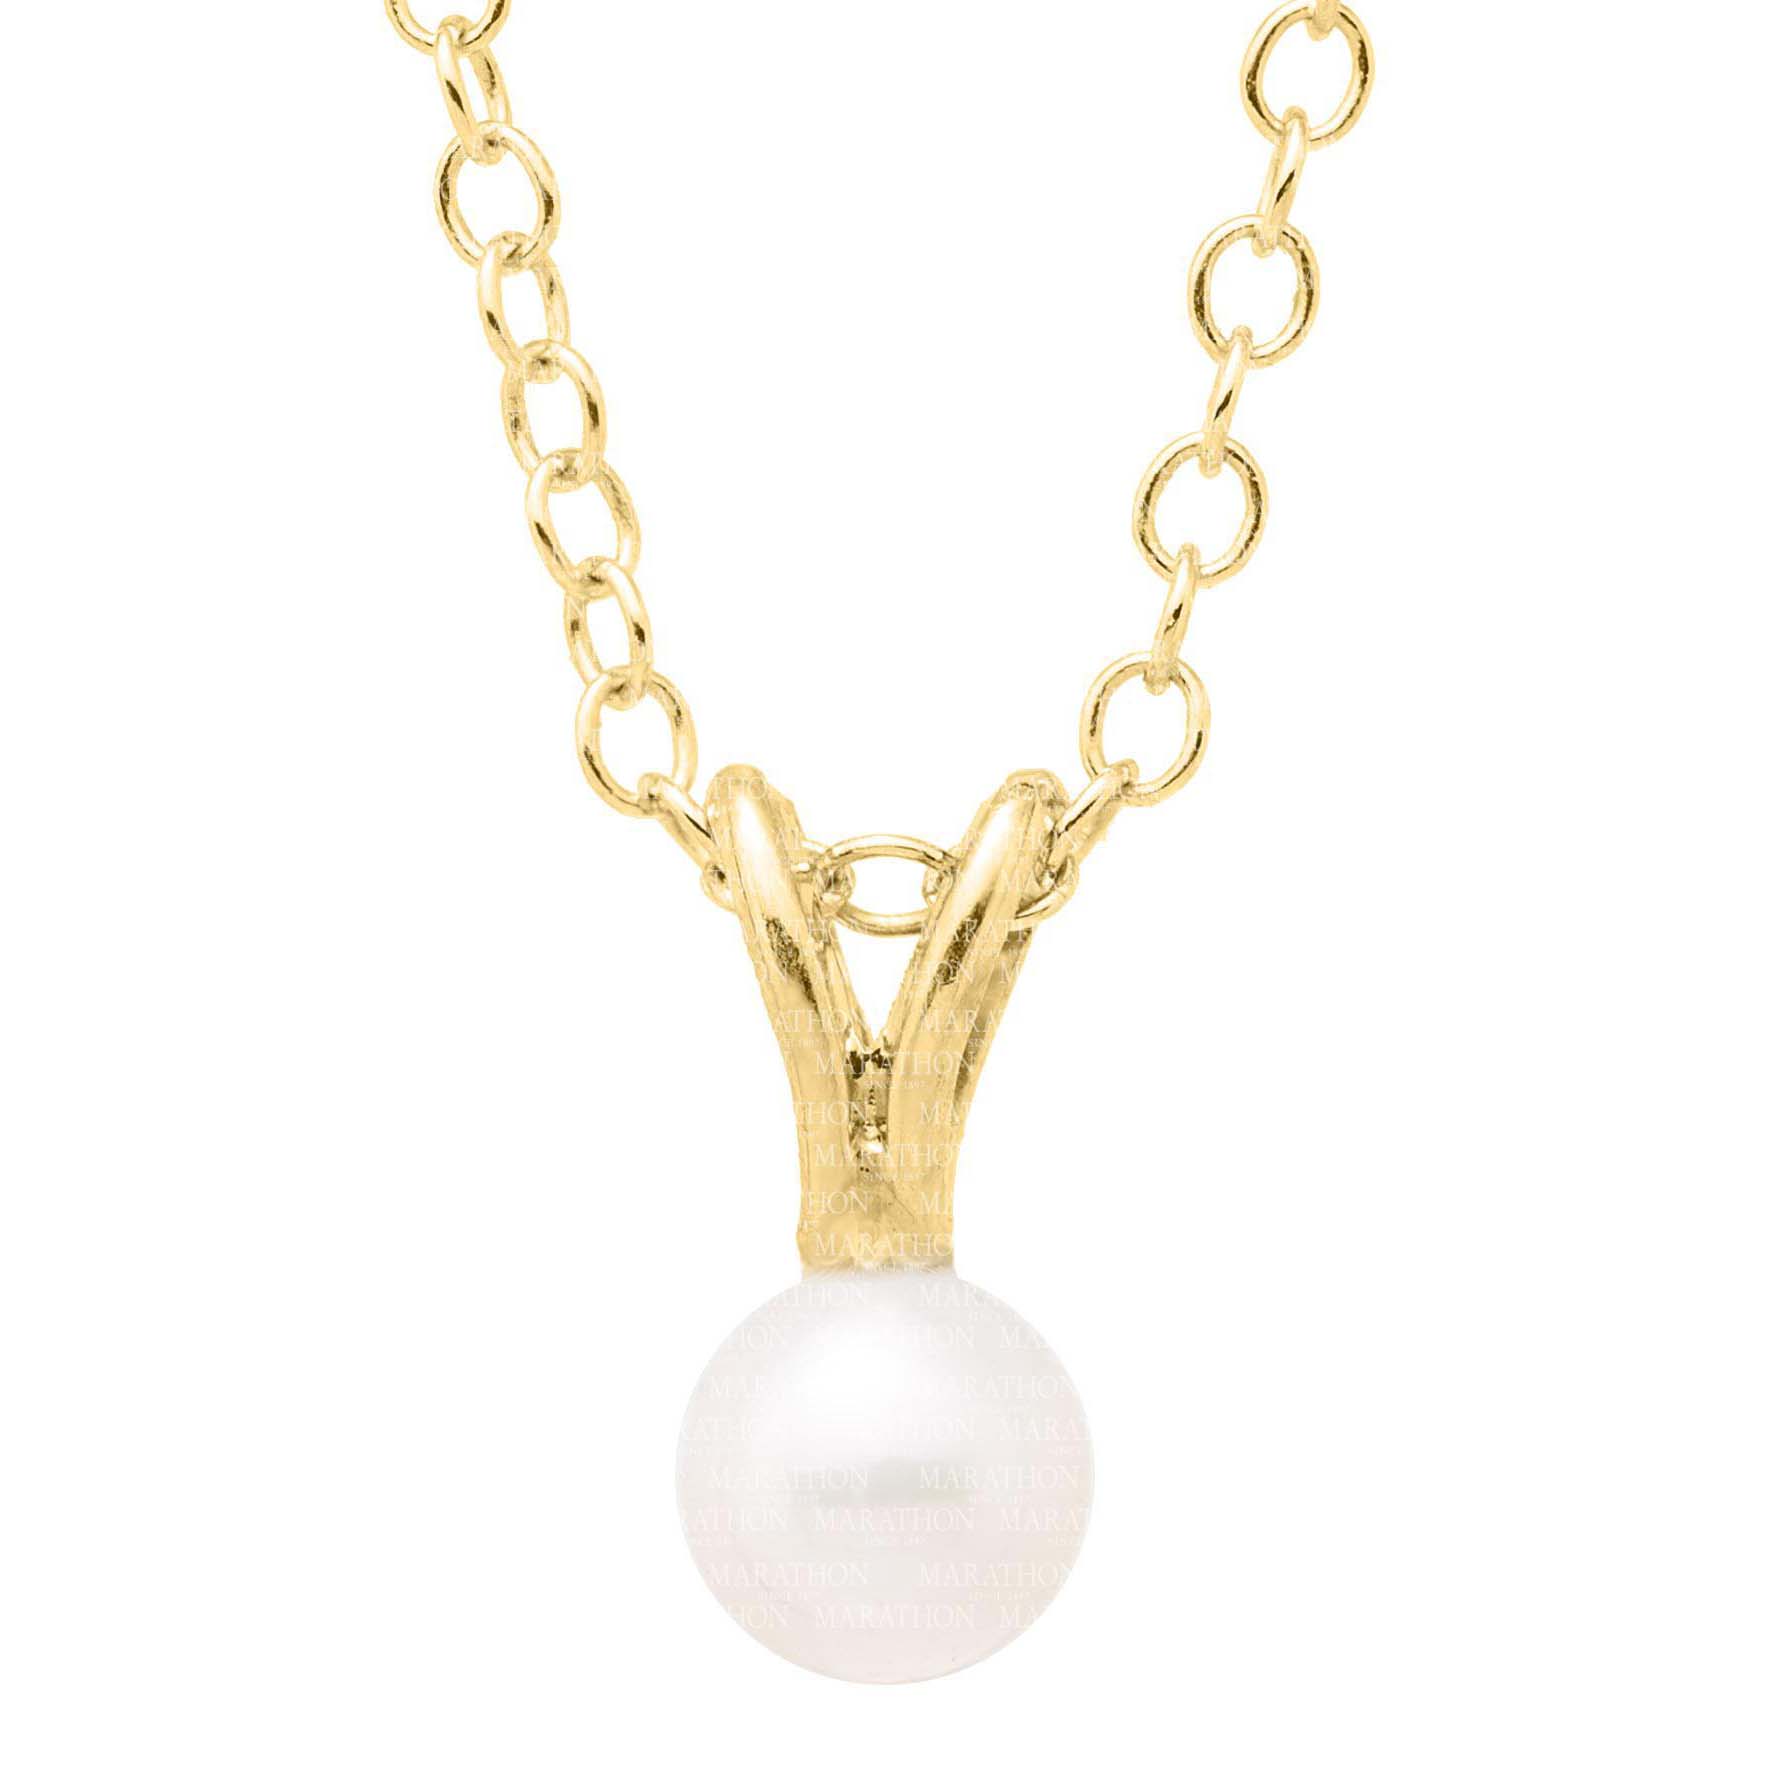 14K Gold-Filled Pearl Kids Pendant. 6x11mm. 15" chain. #12368